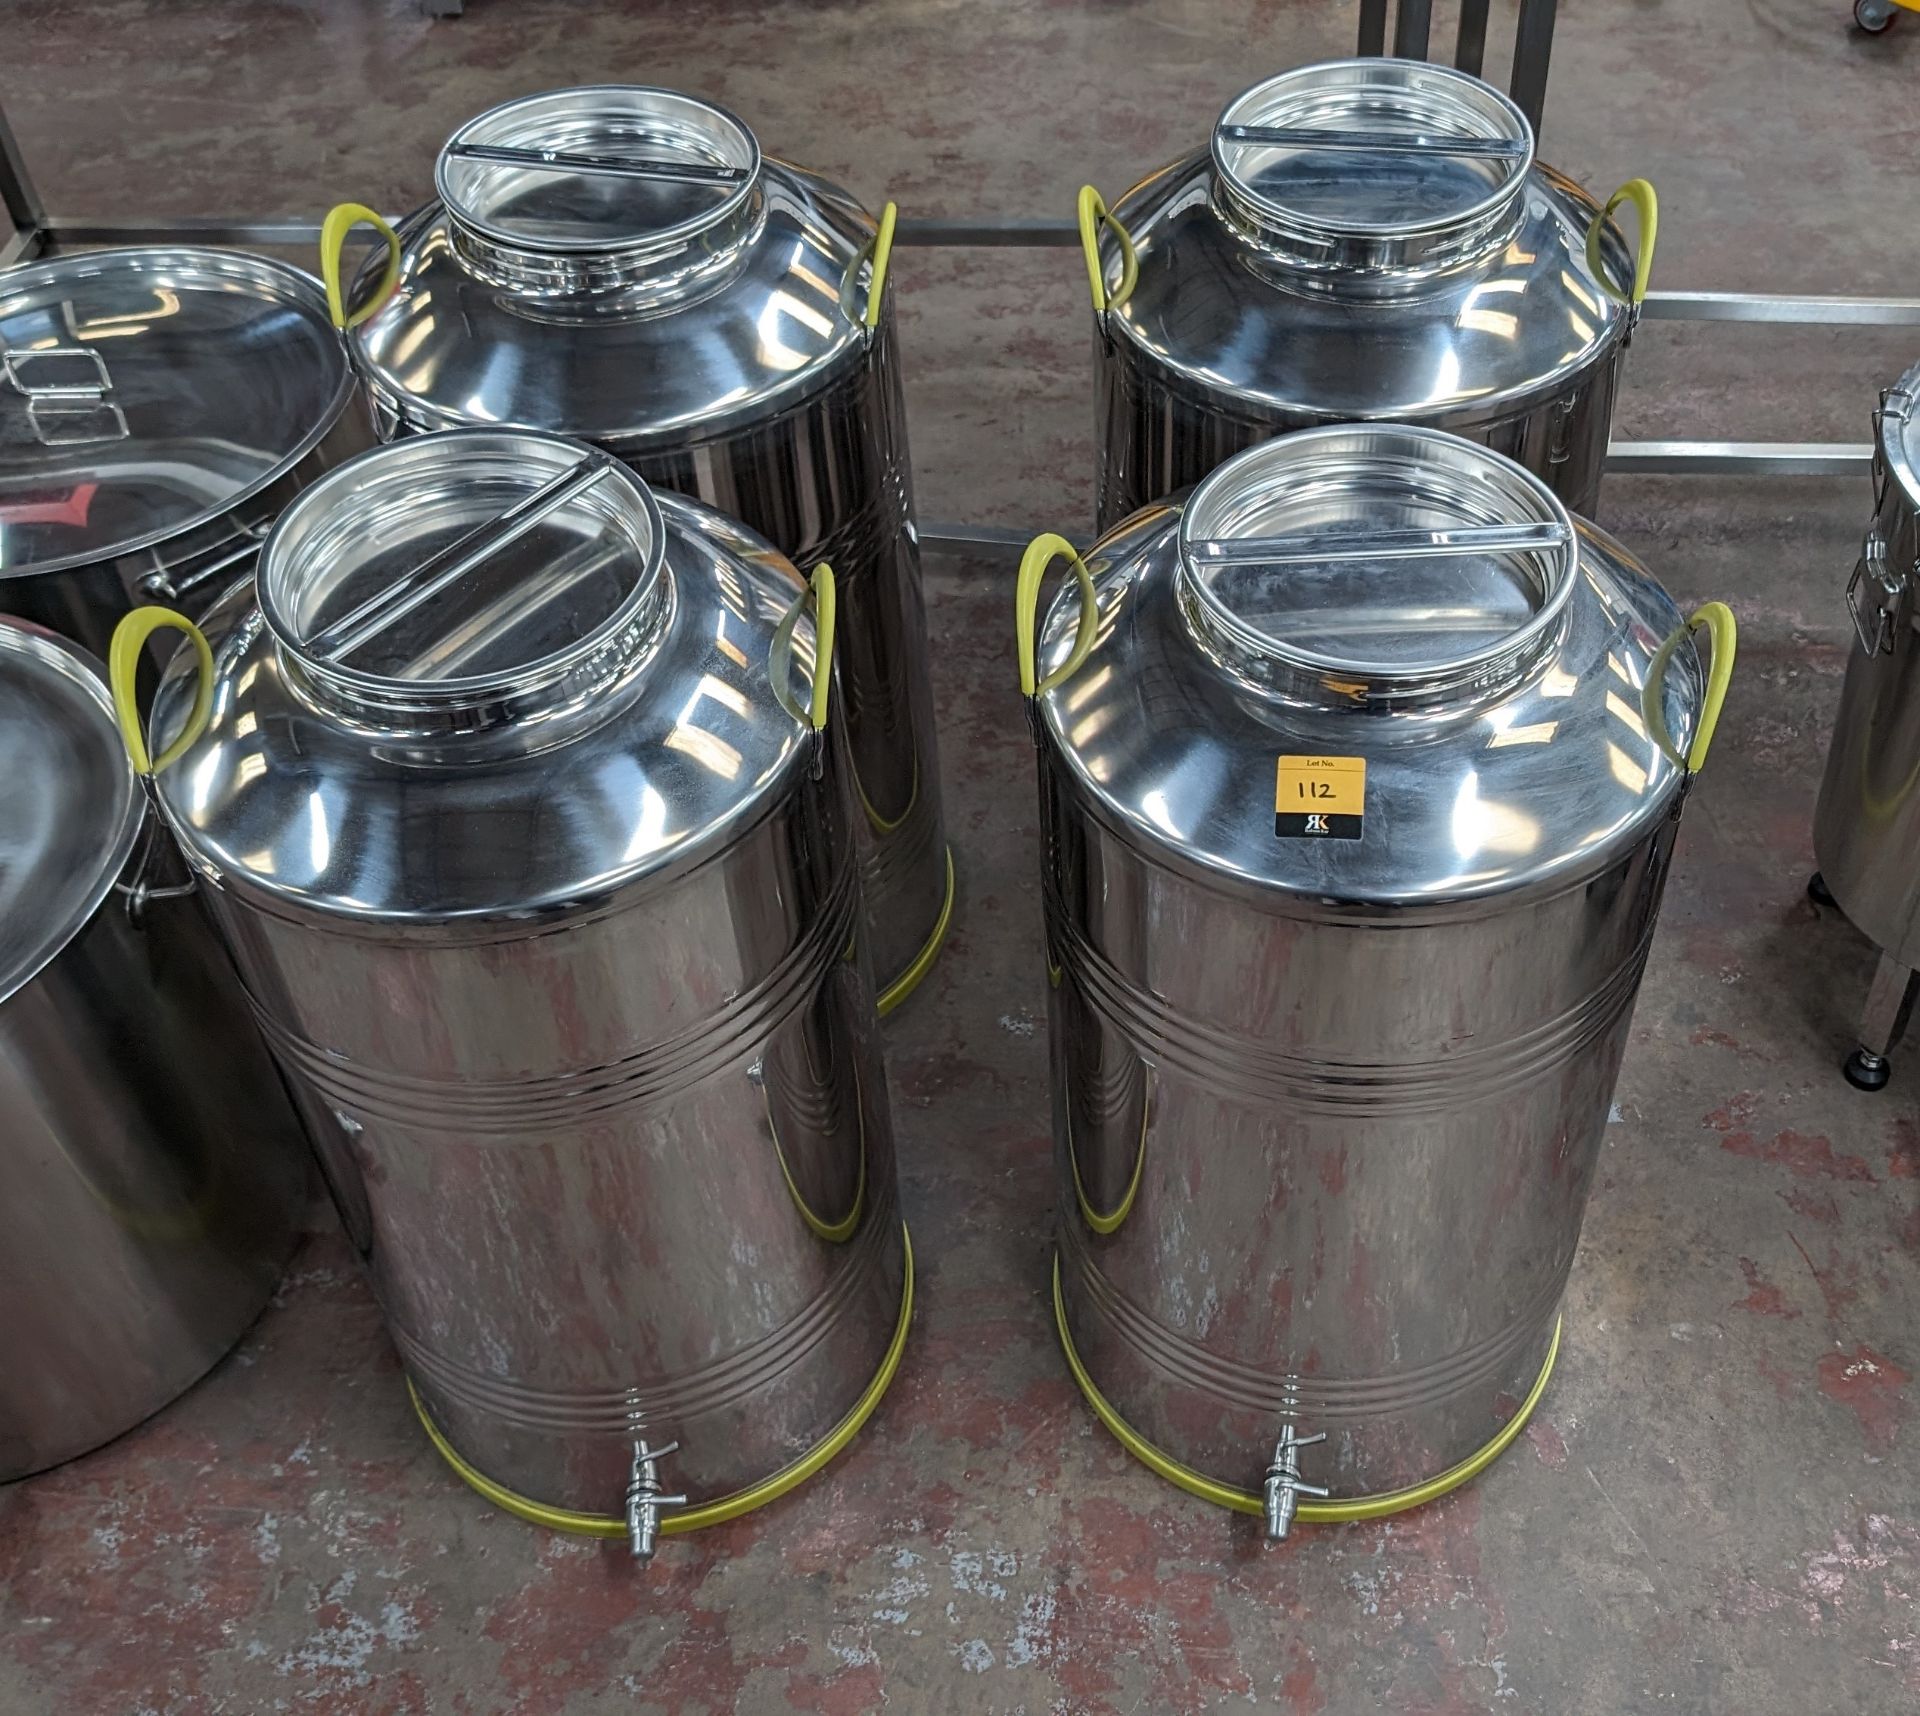 4 of 100L stainless steel milk churns, each with their own lid